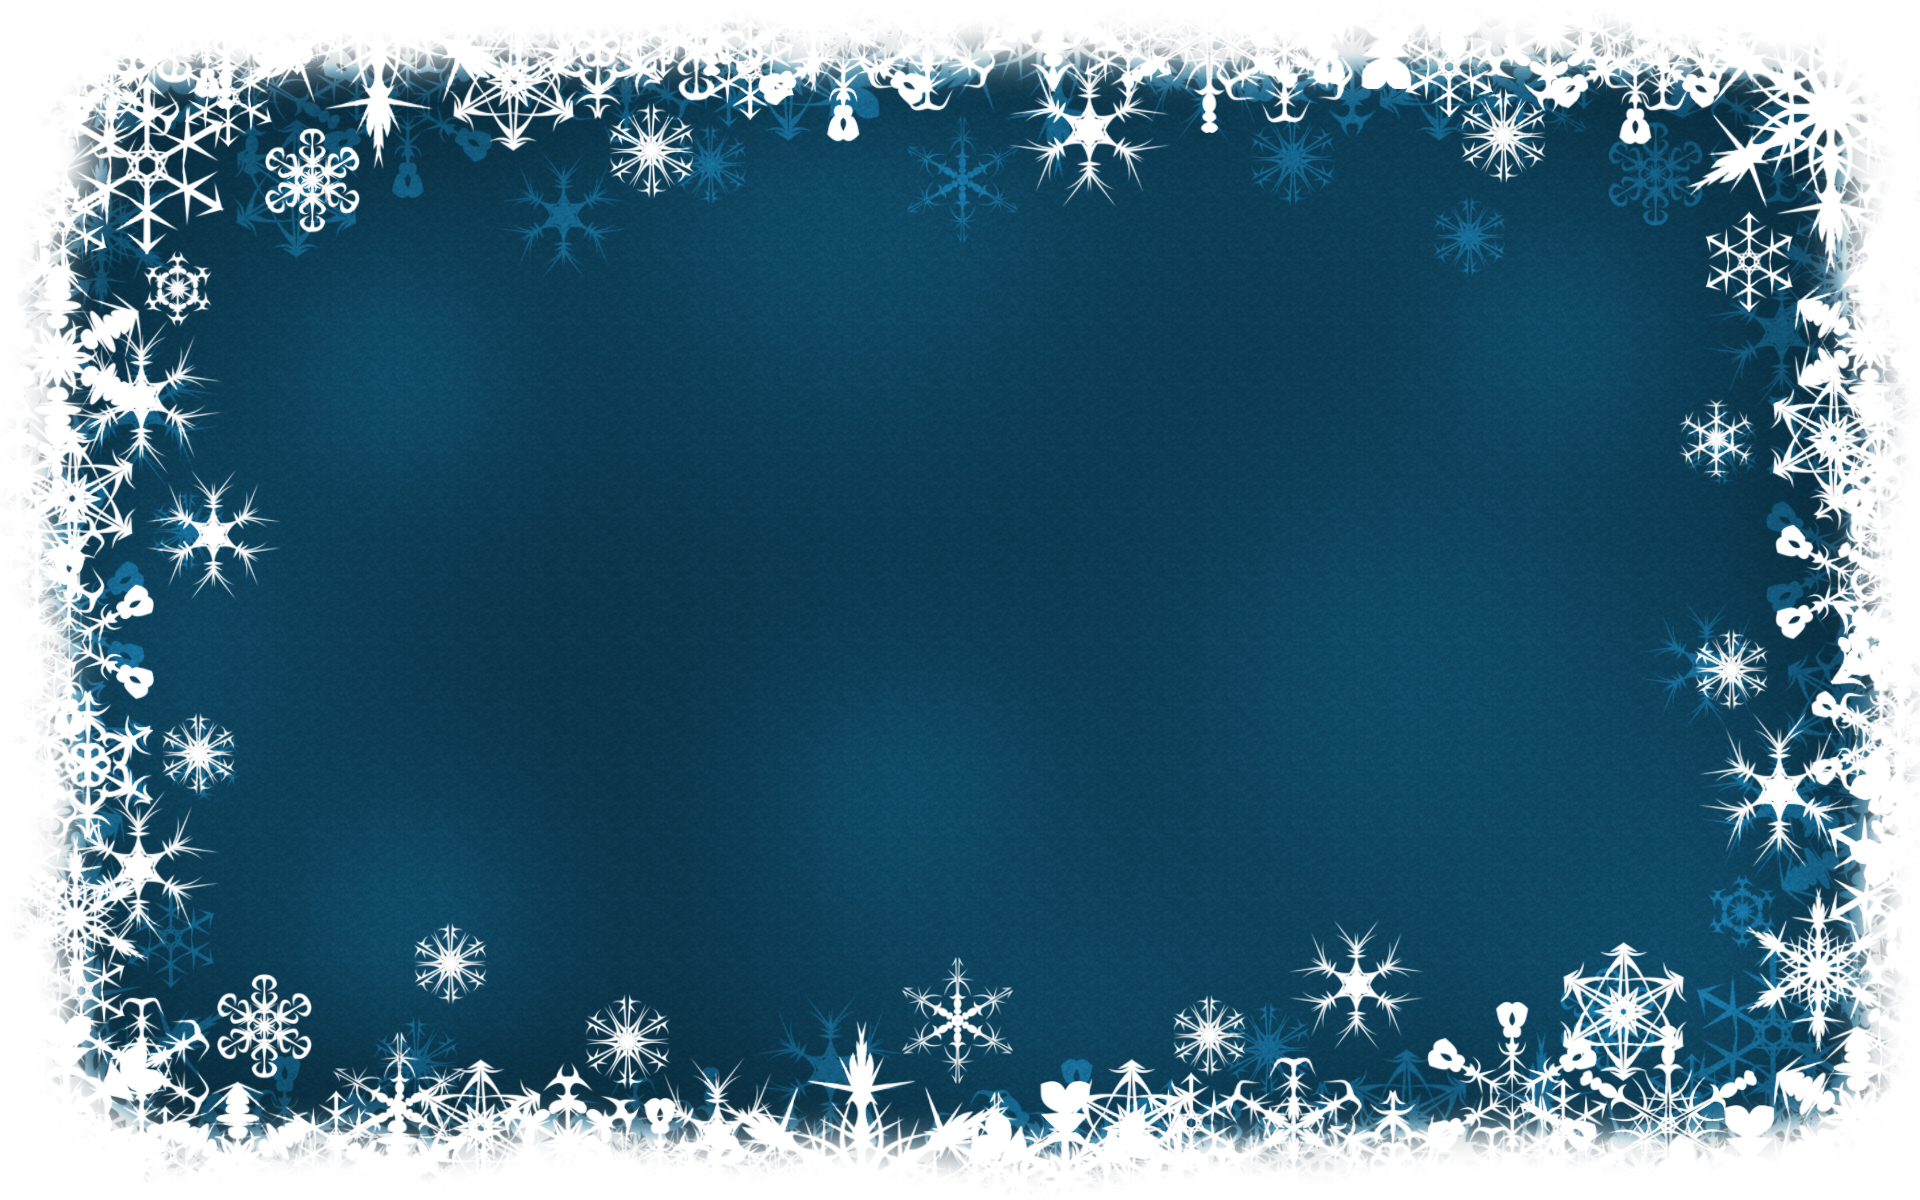 Blue Christmas Background Wallpaper Image Amp Pictures Becuo